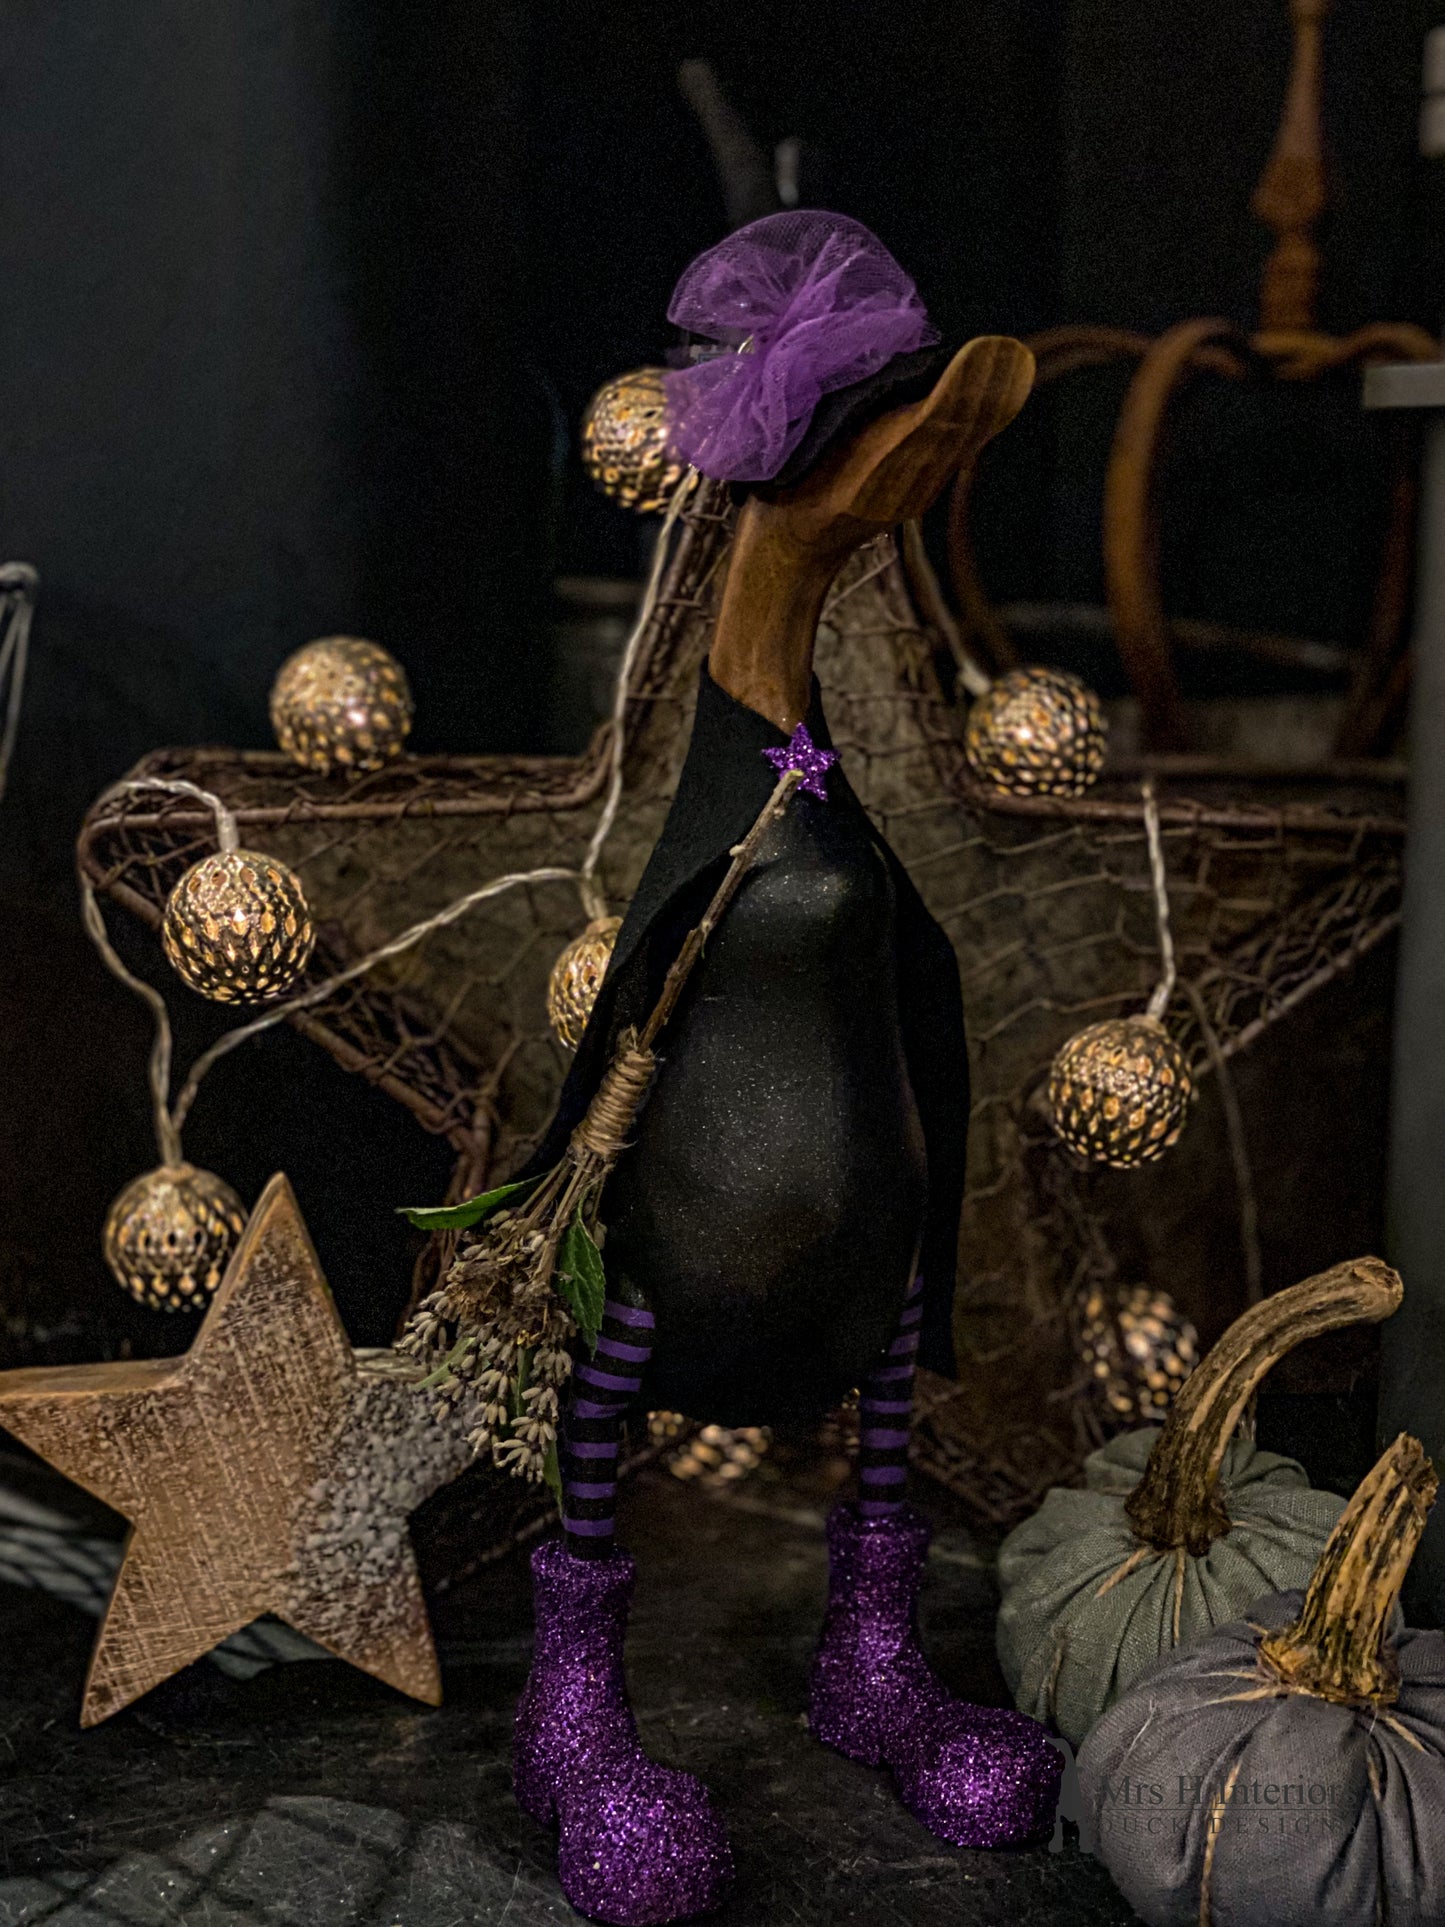 Jean The Witch Duck - Decorated Wooden Duck in Boots by Mrs H the Duck Lady